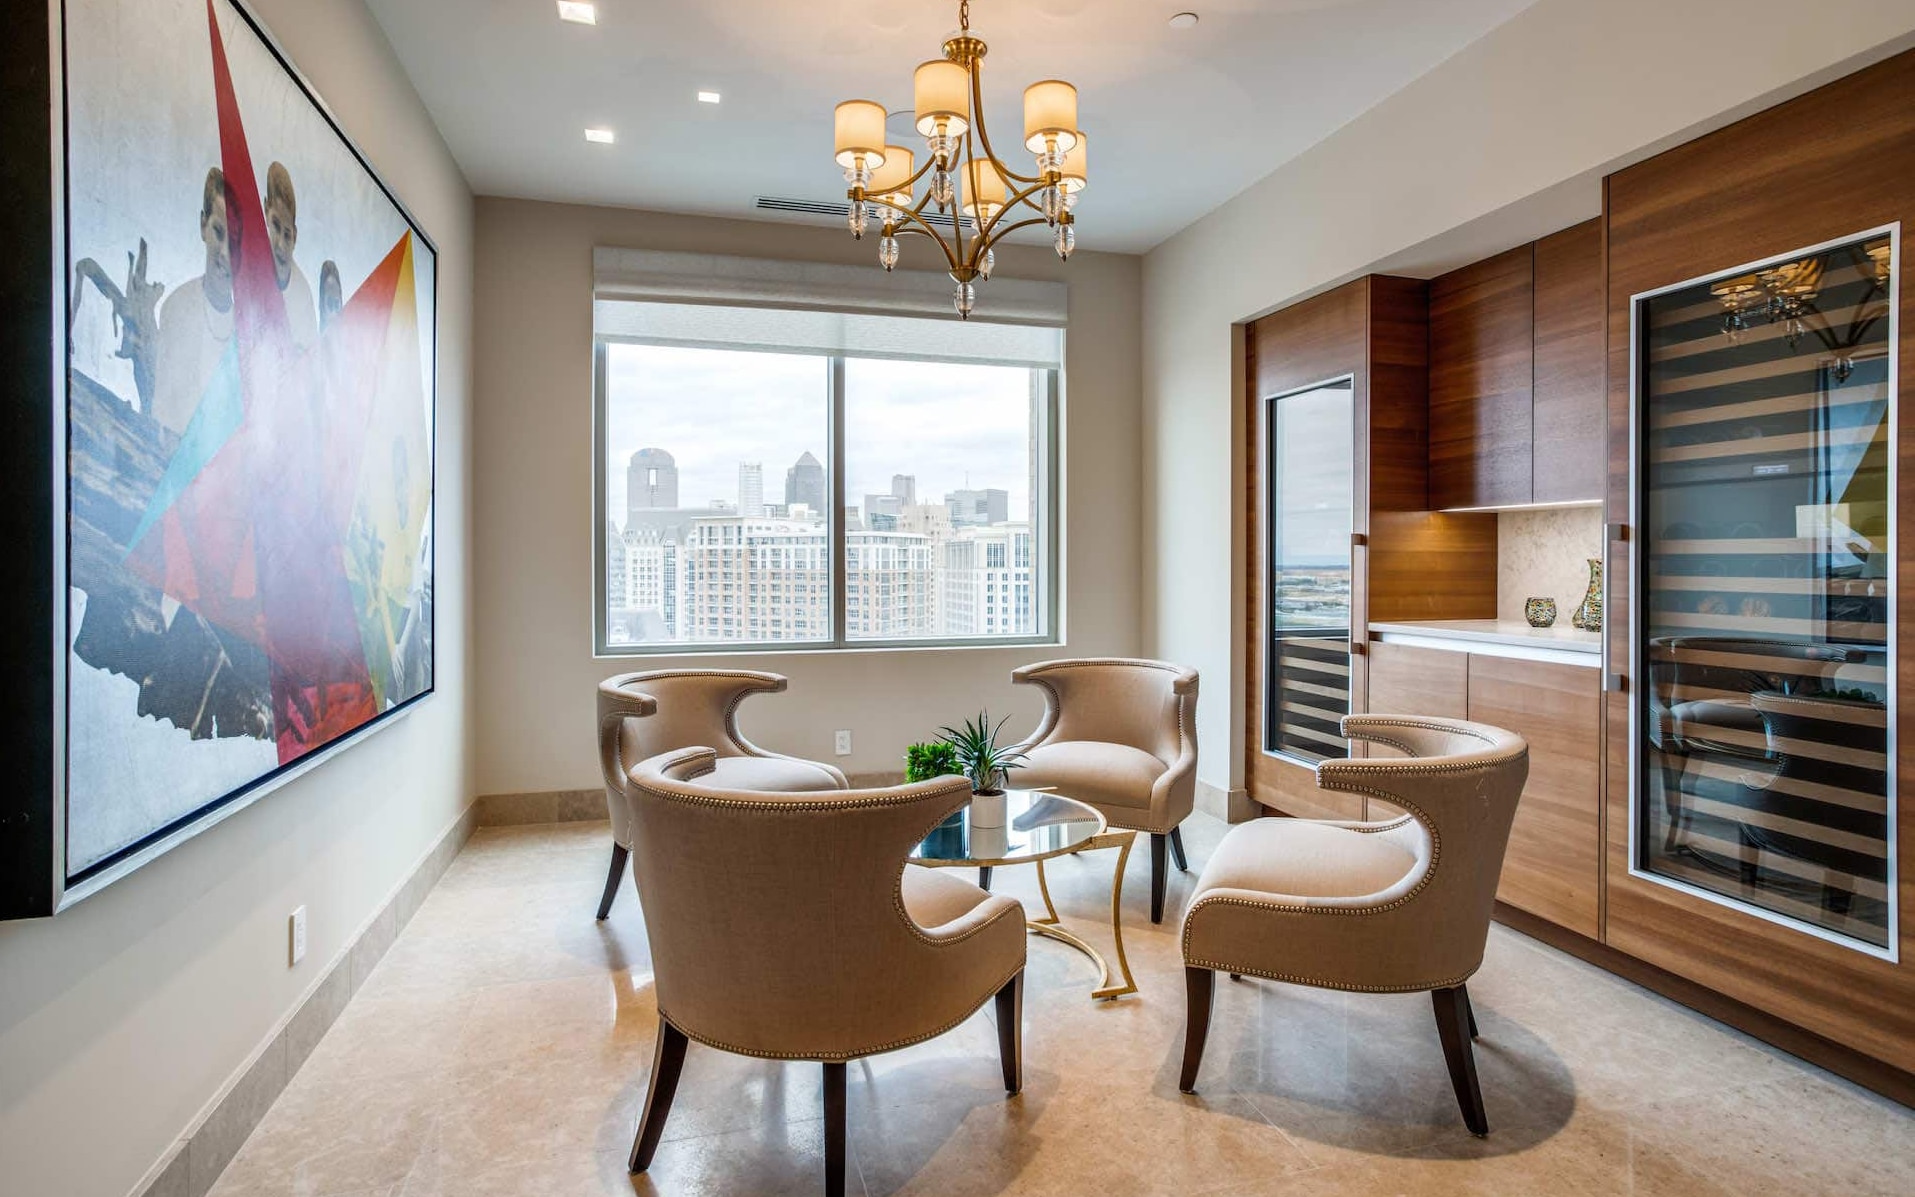 This seating vignette creates a cozy wine-tasting nook with a great view of downtown Dallas